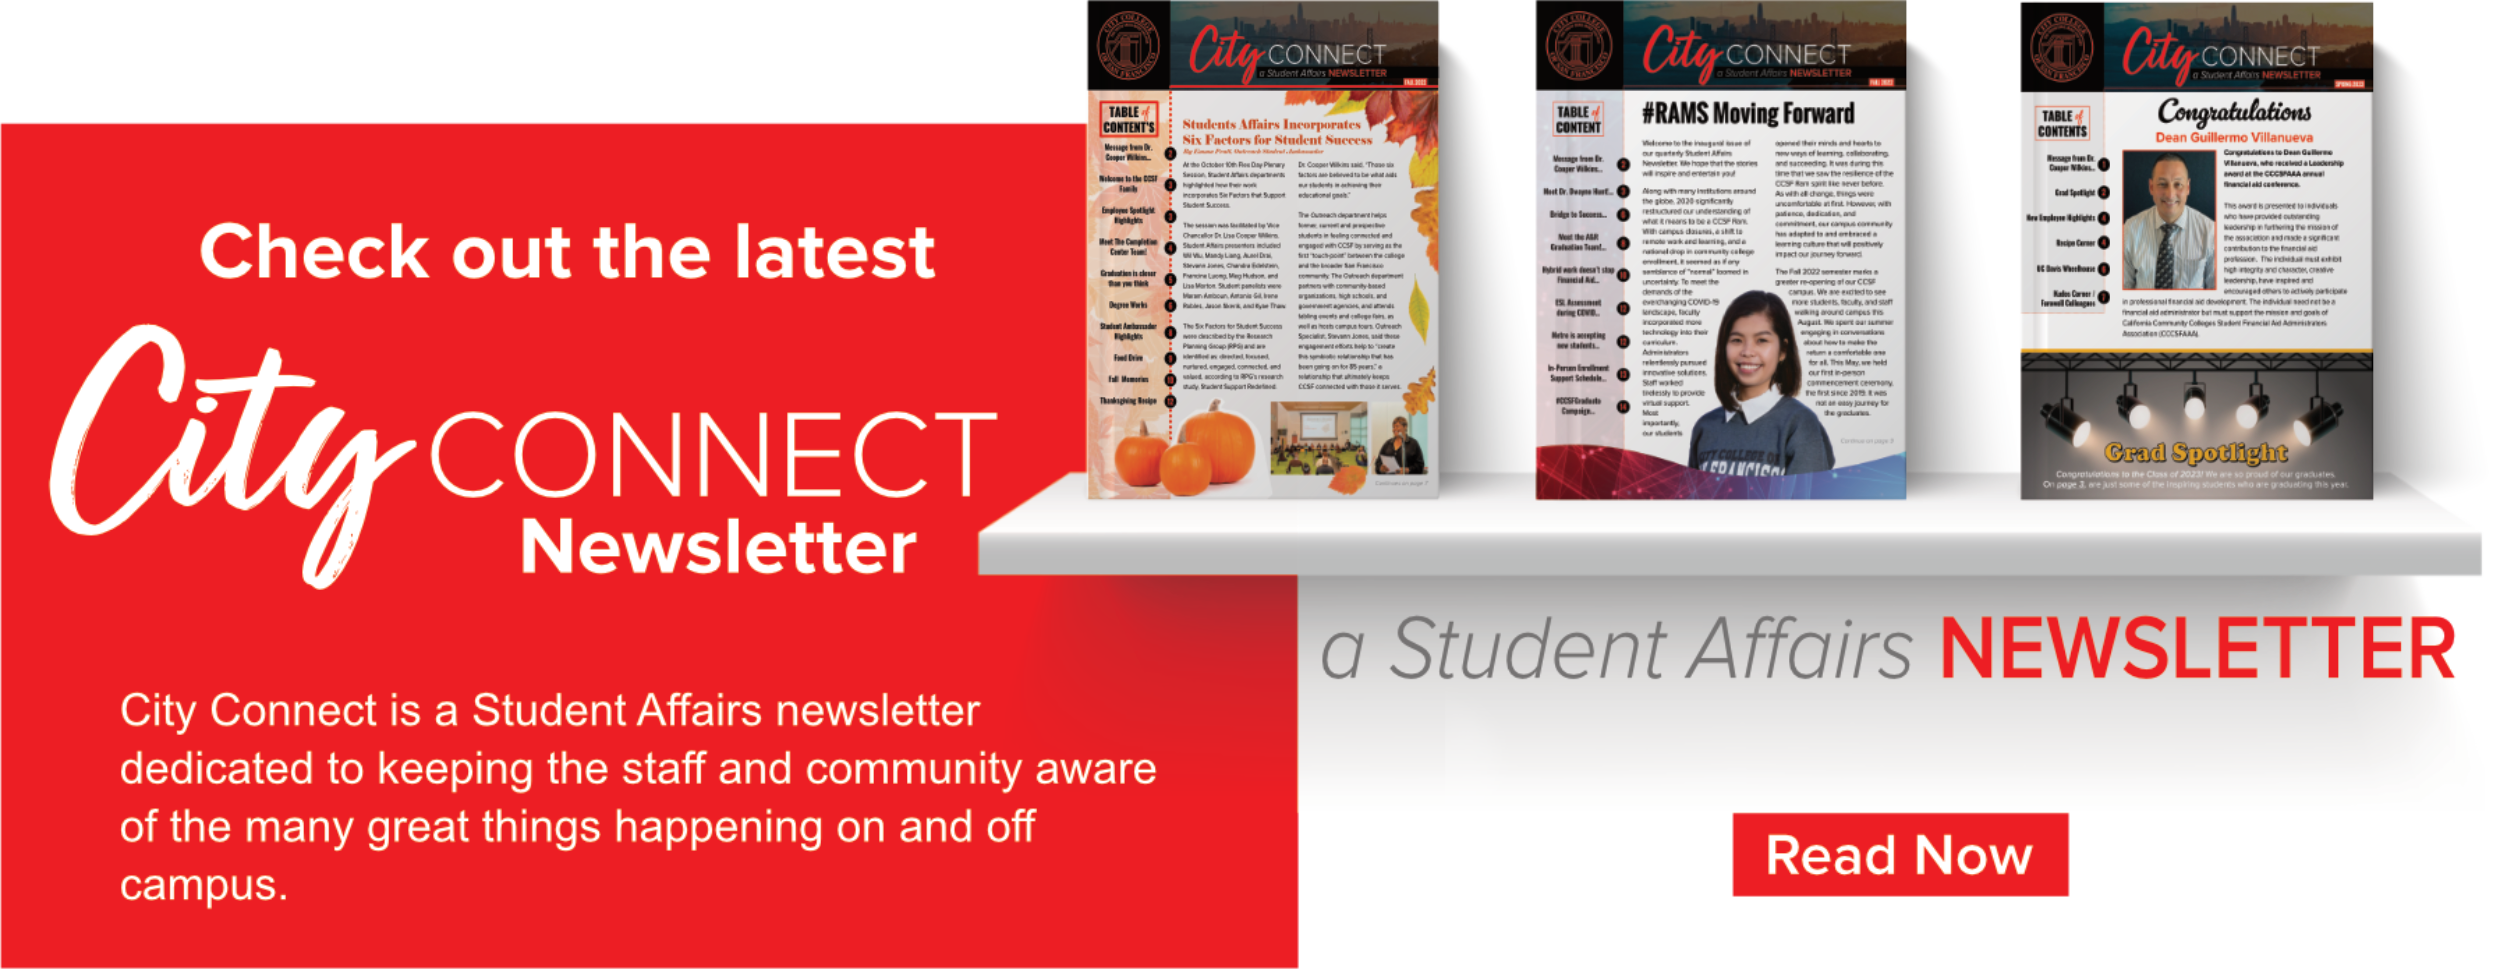 City Connect Newsletter